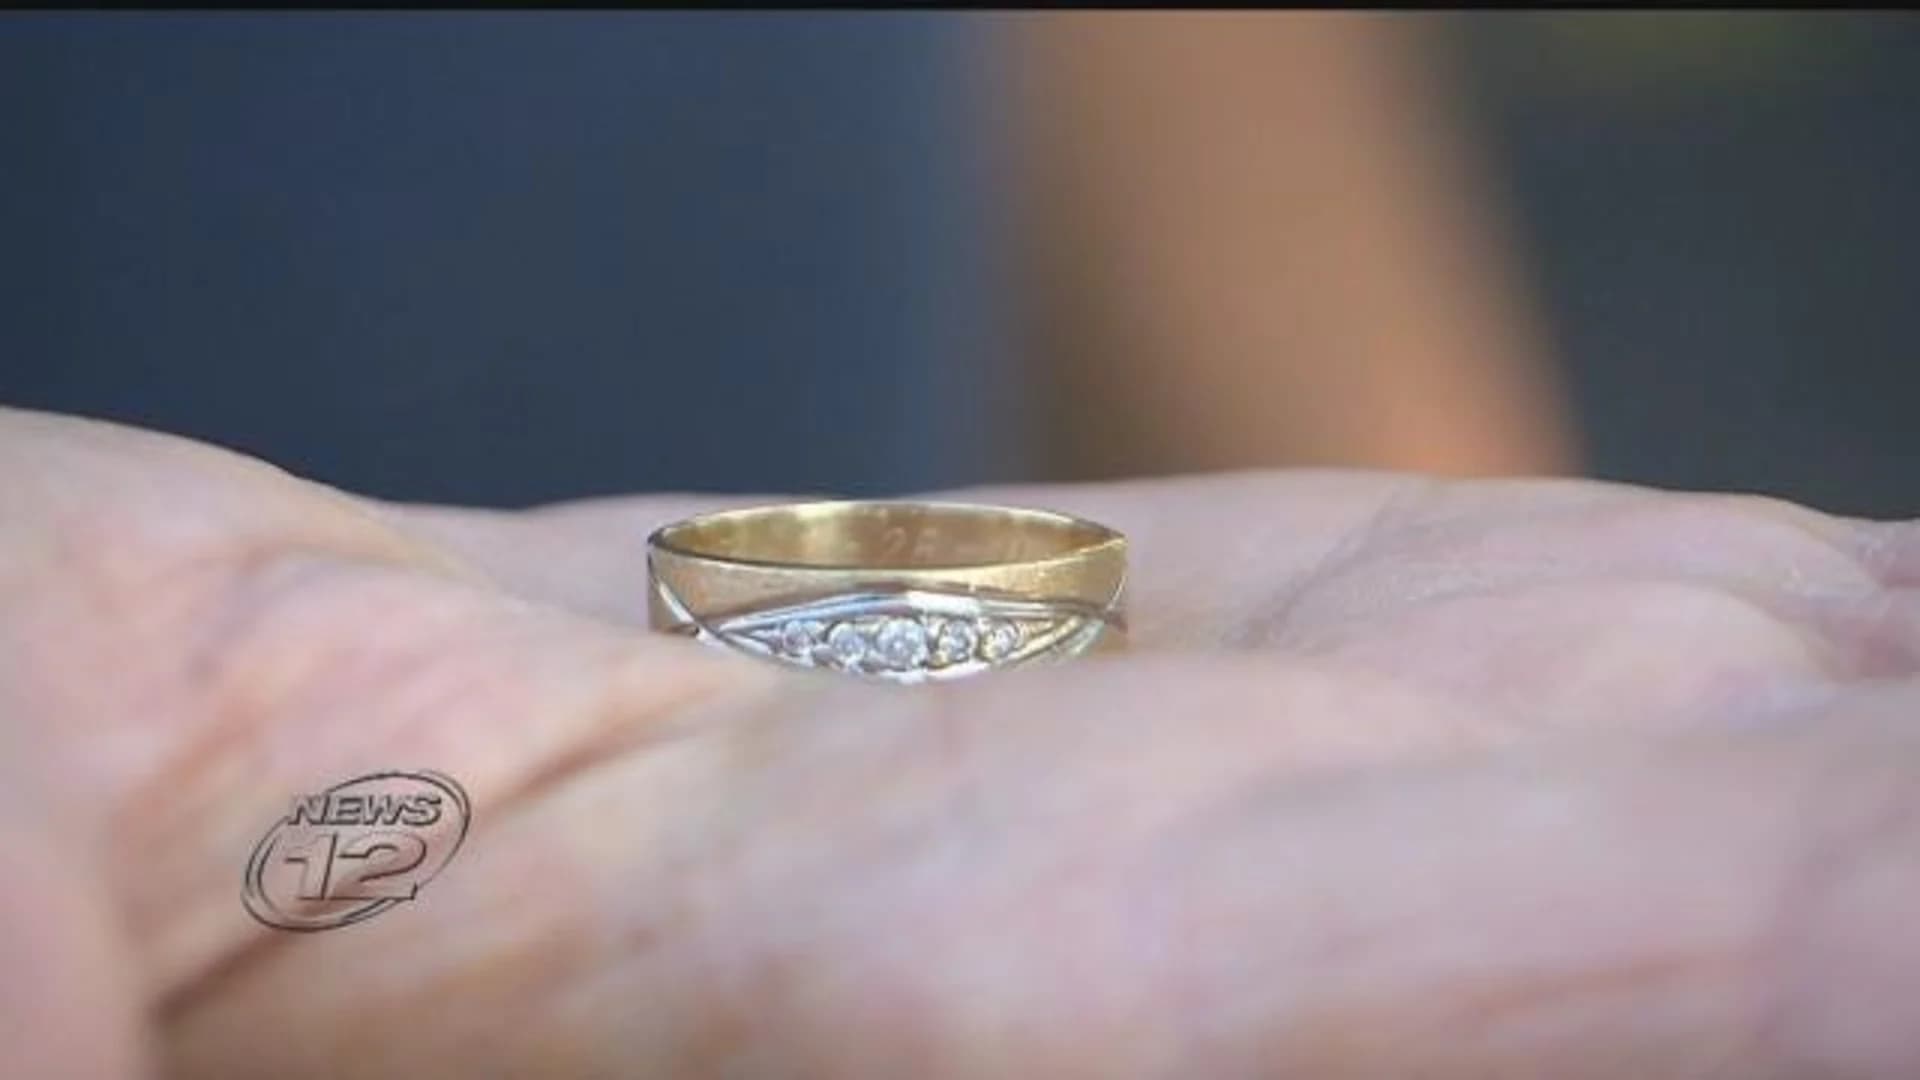 Man looking for owner of ring found at Tanger Outlet